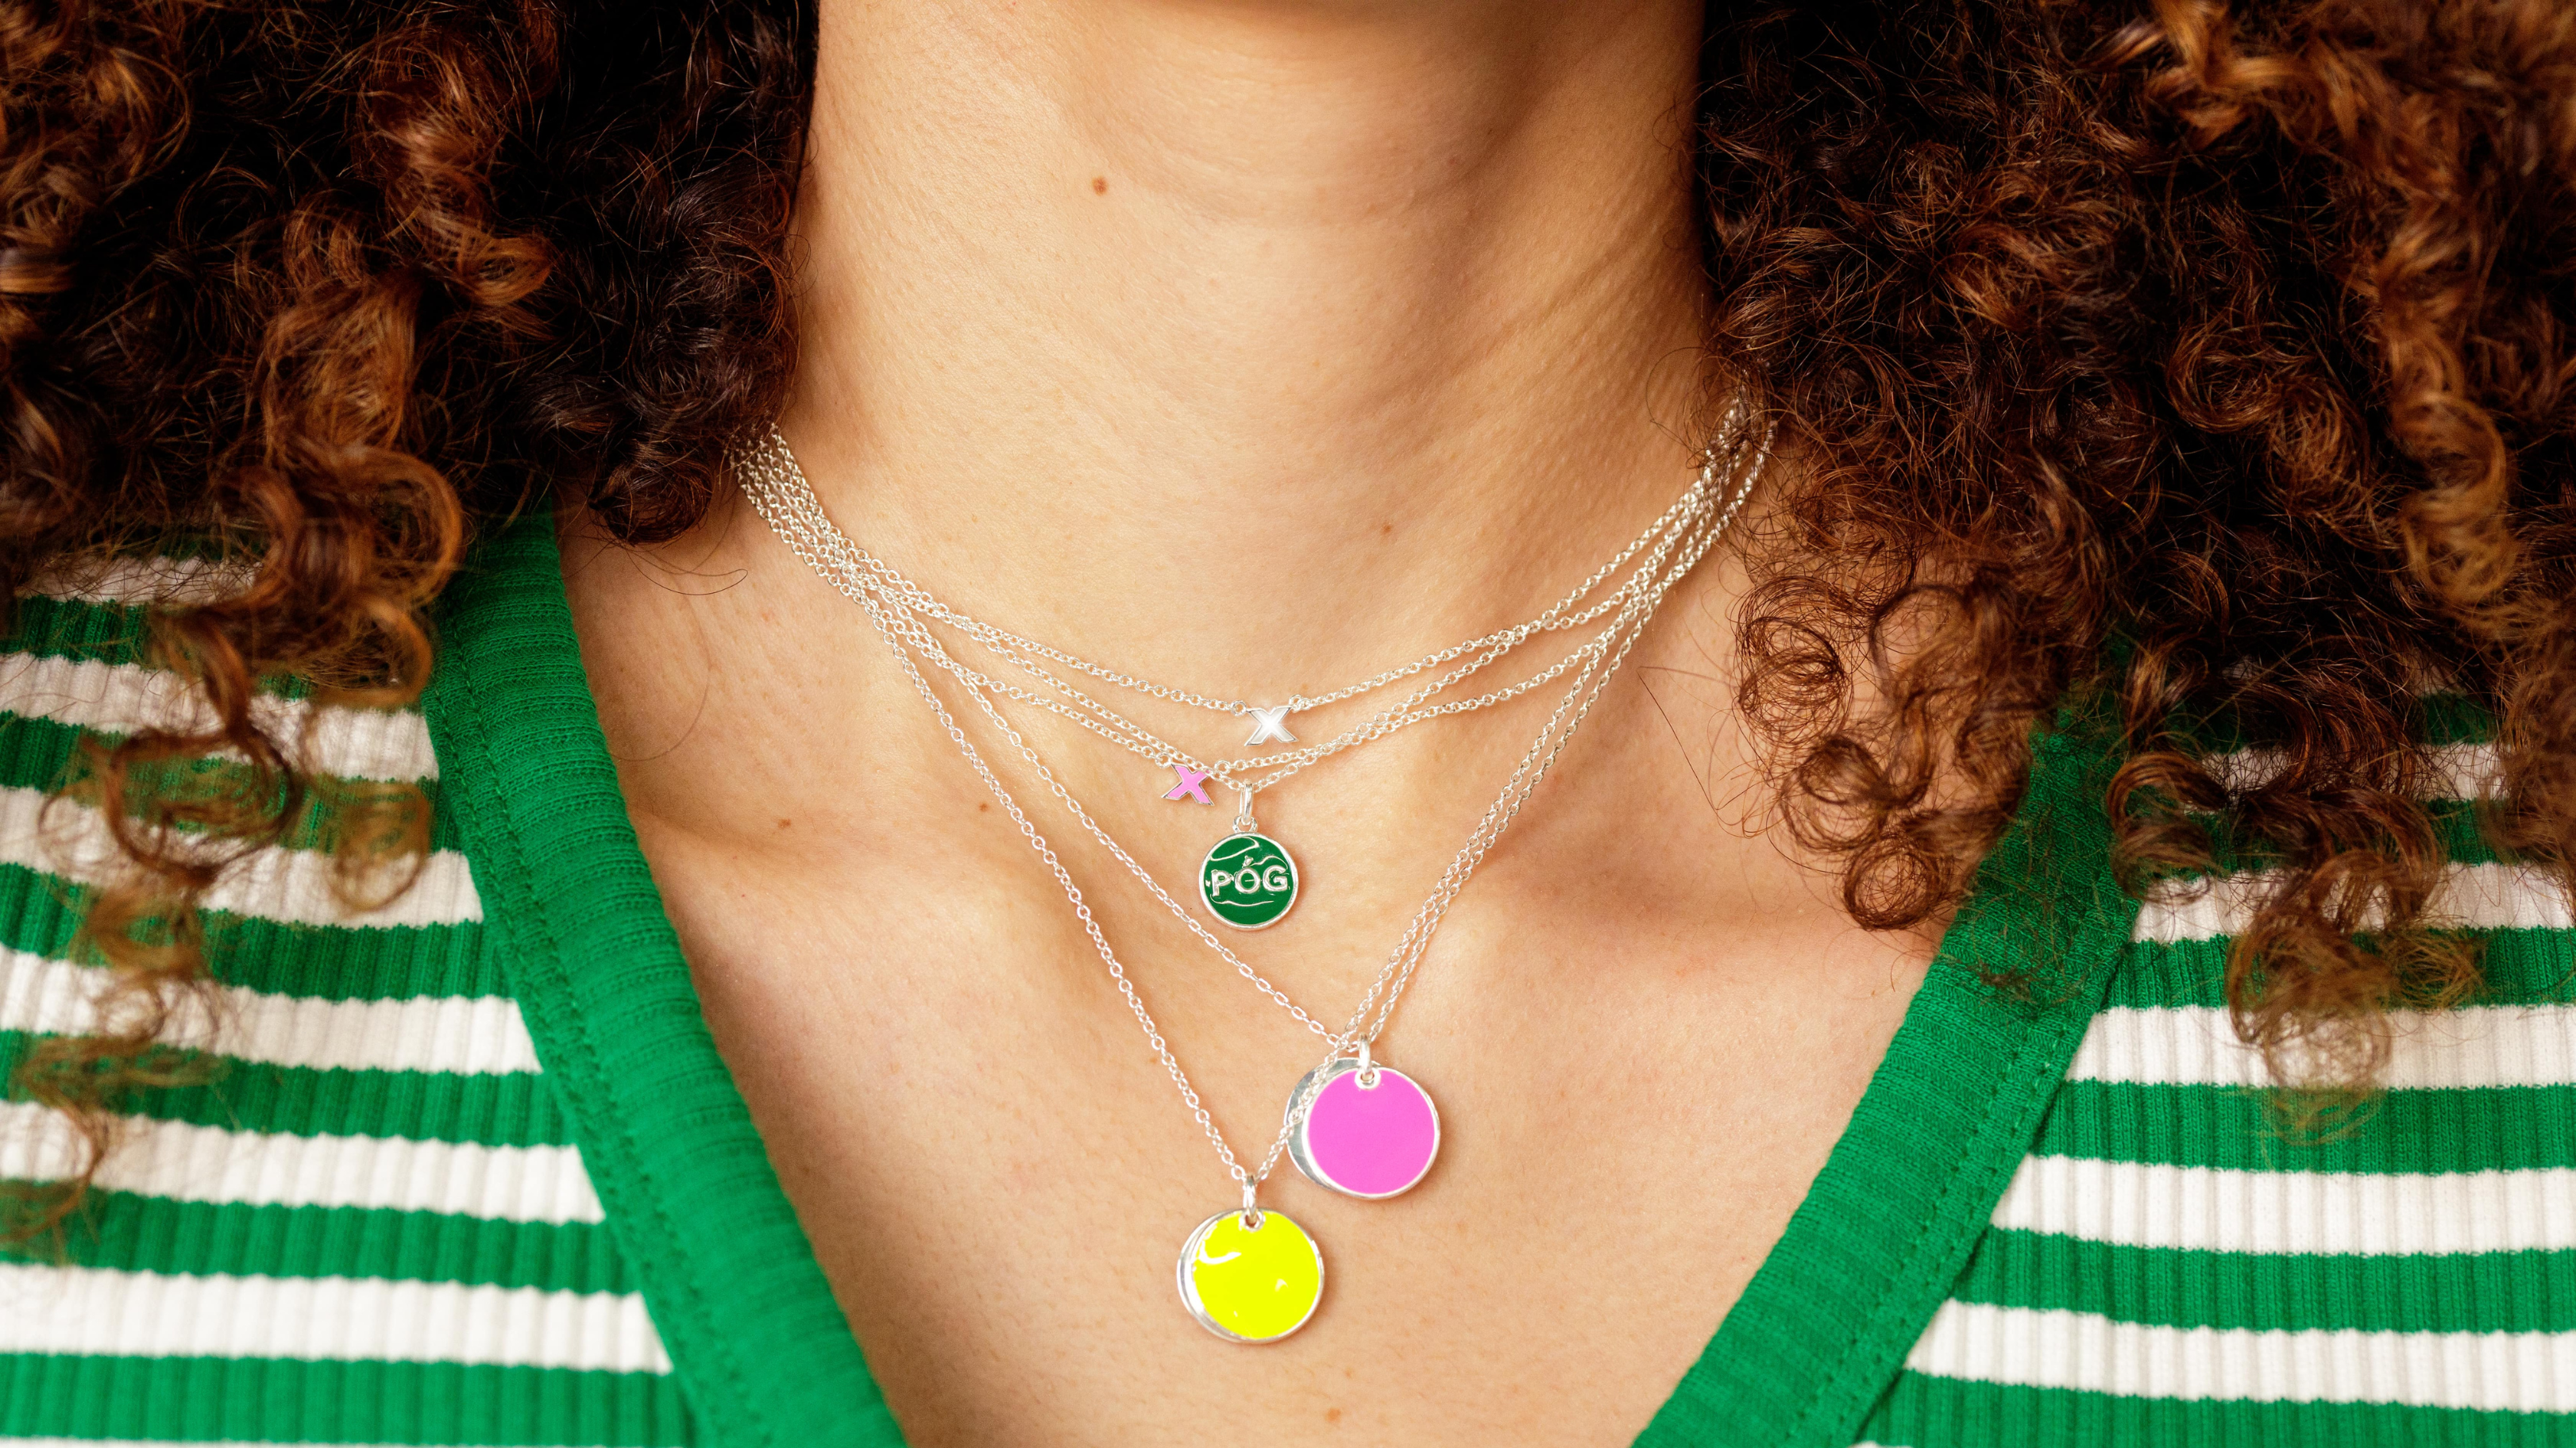 A woman wearing necklaces from POG